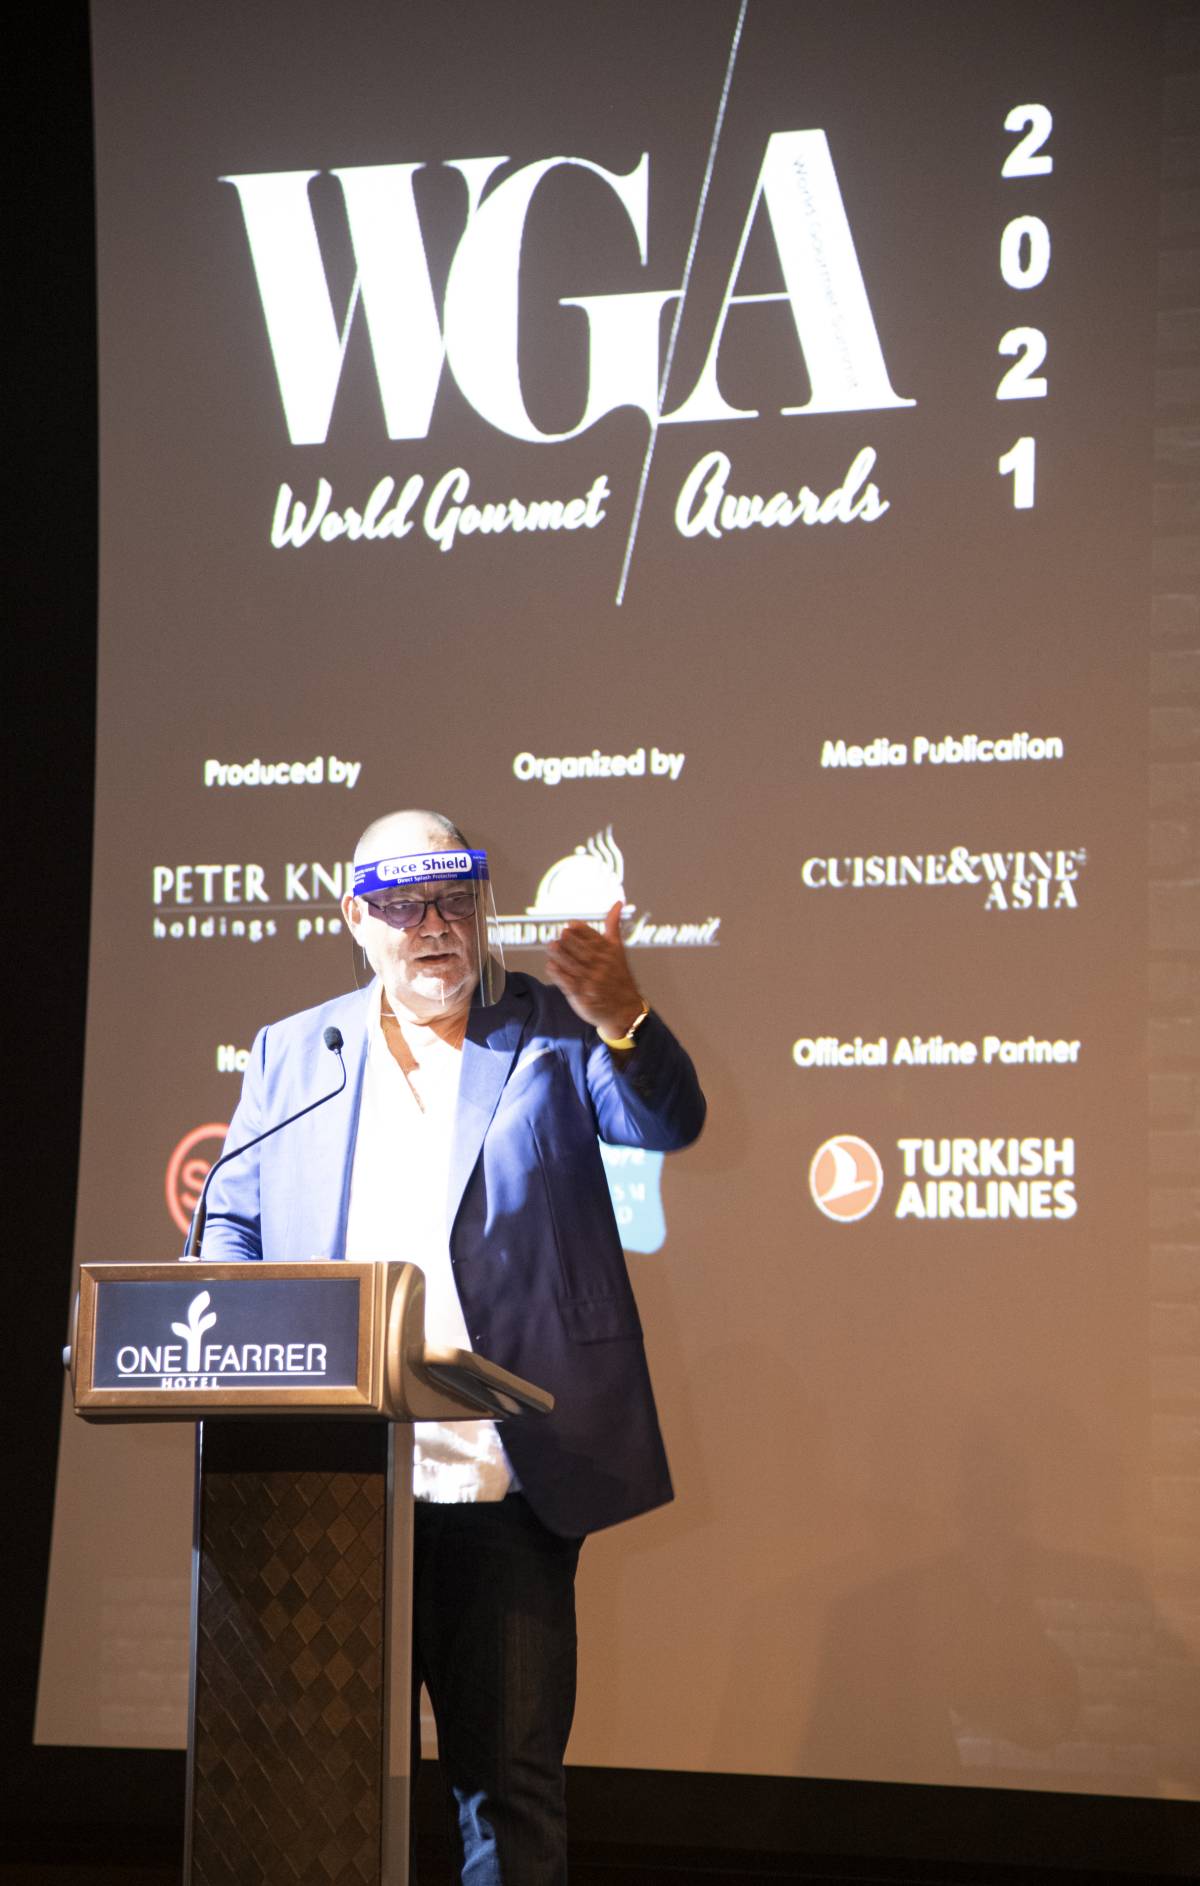 World Gourmet Awards 2021 Celebrates Culinary Leaders Despite the Pandemic